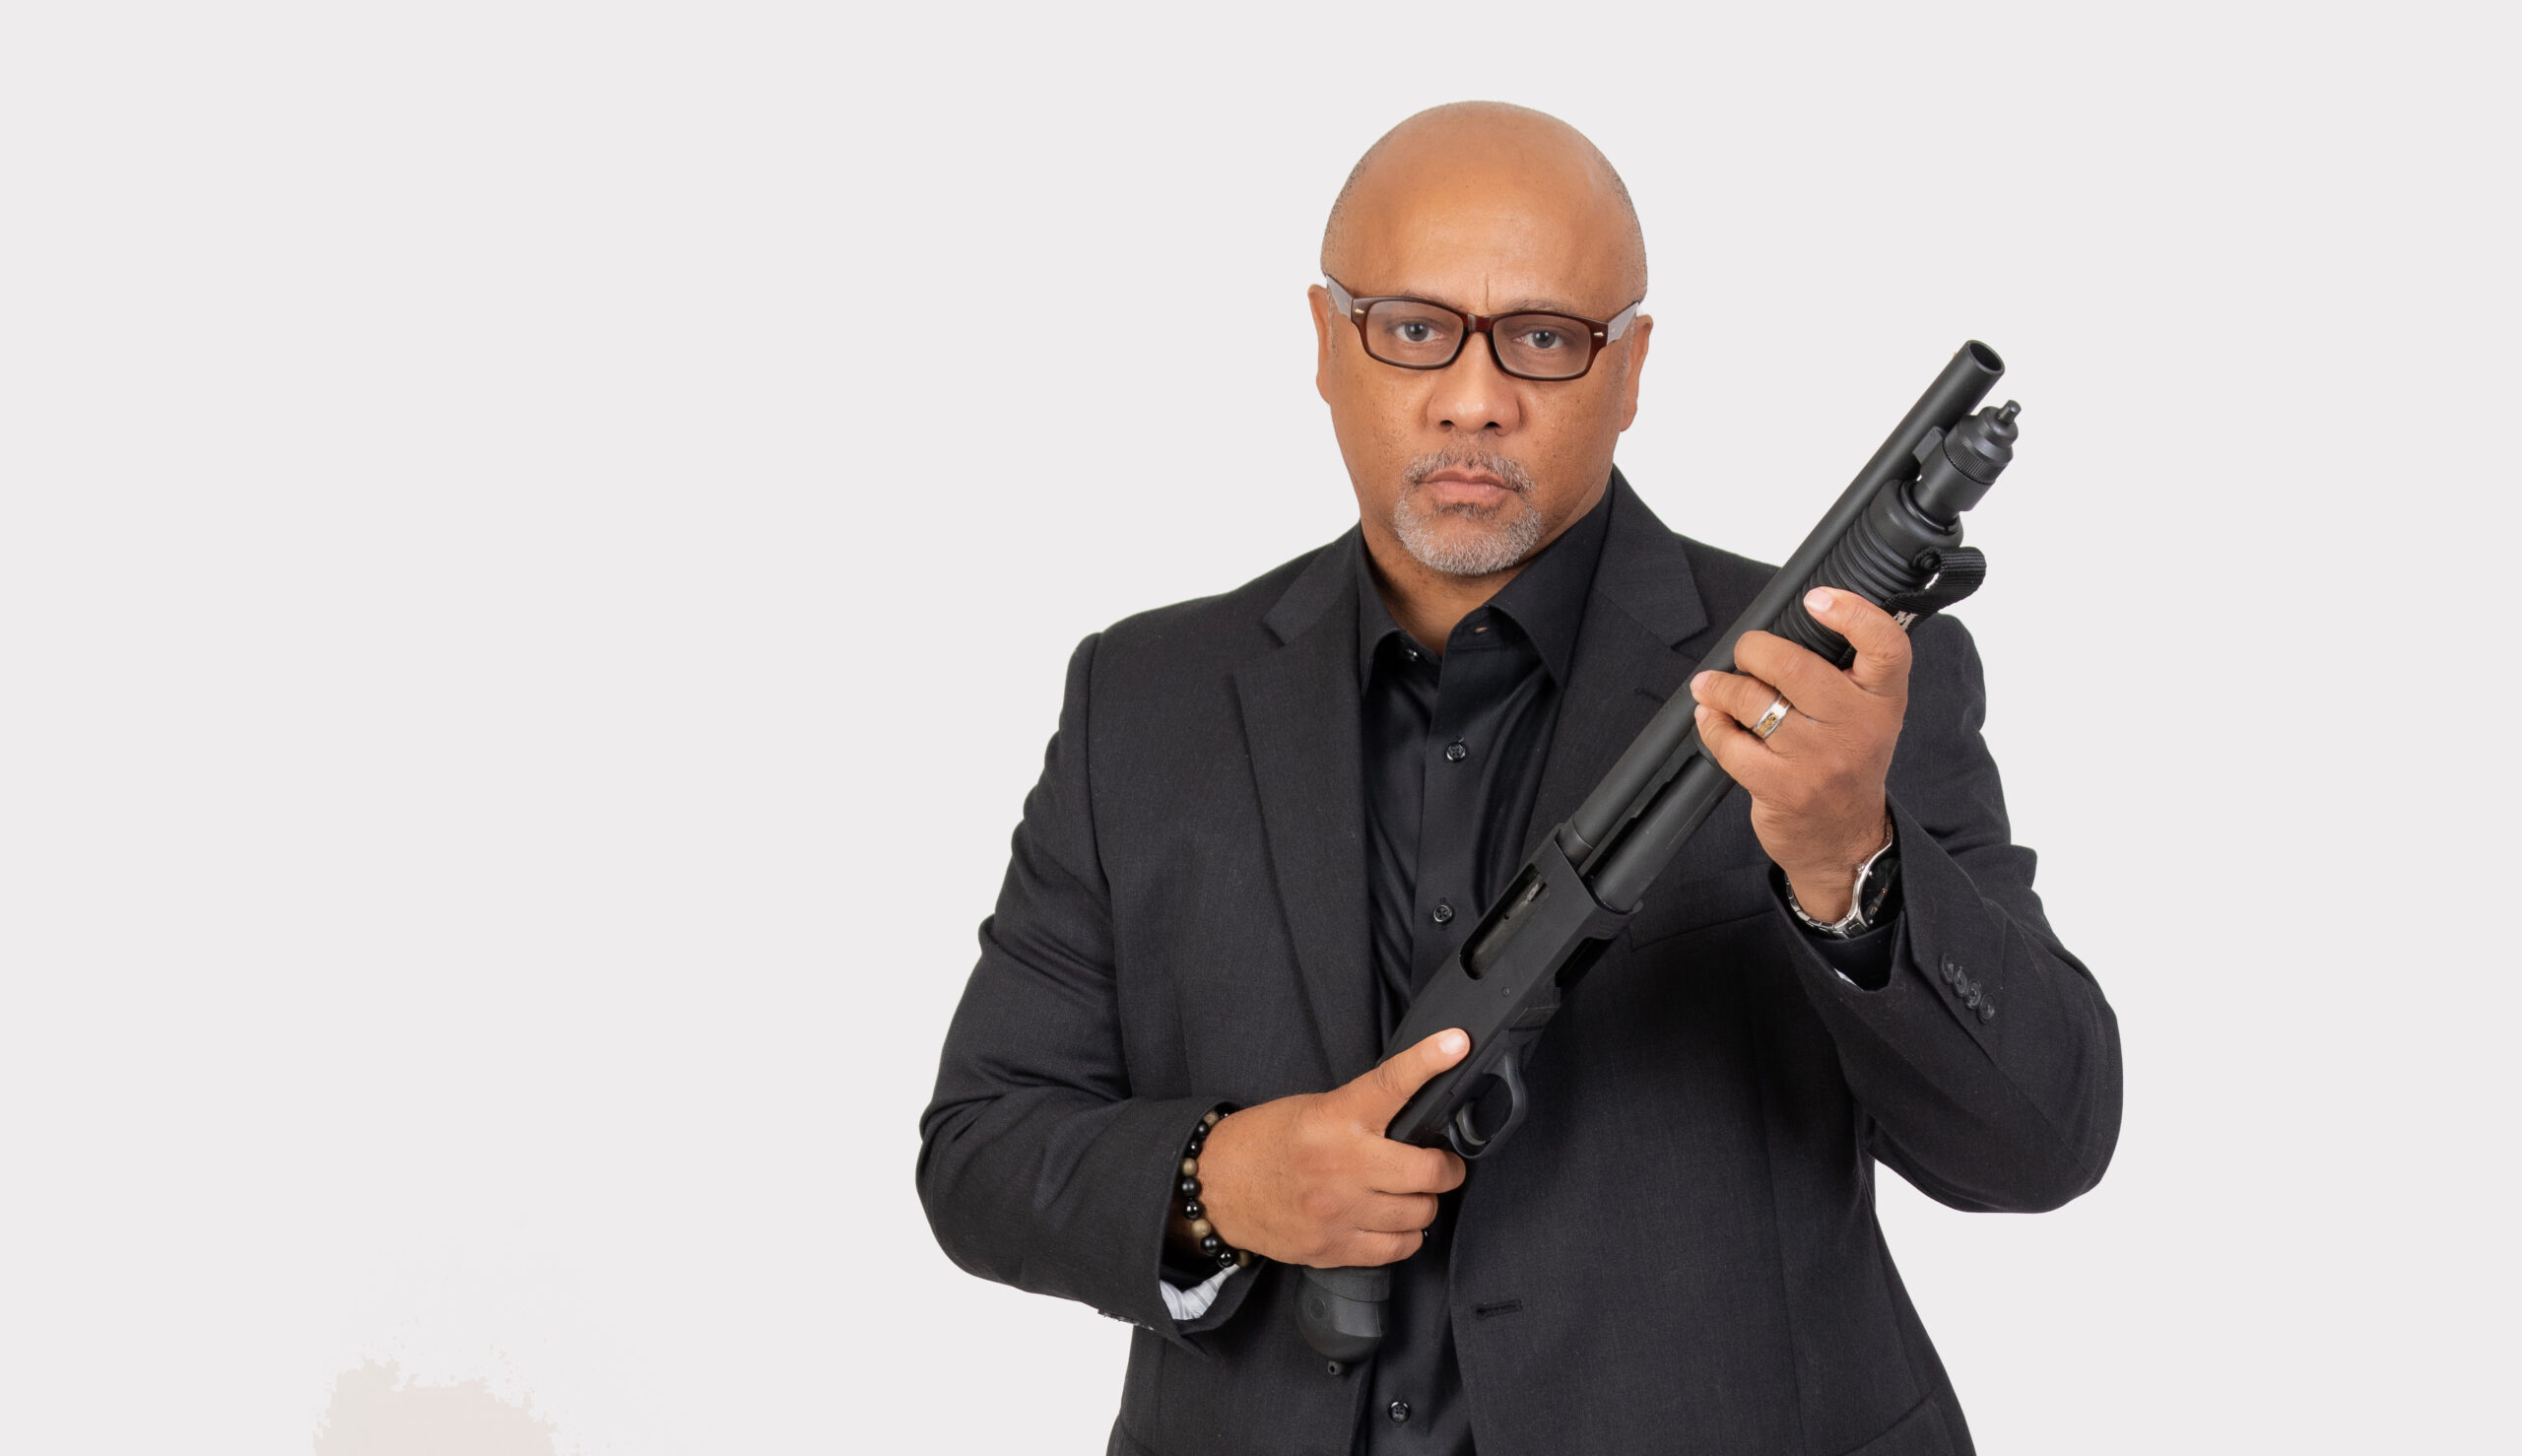 A portrait of Philip Smith, founder of the National African American Gun Owners Association.